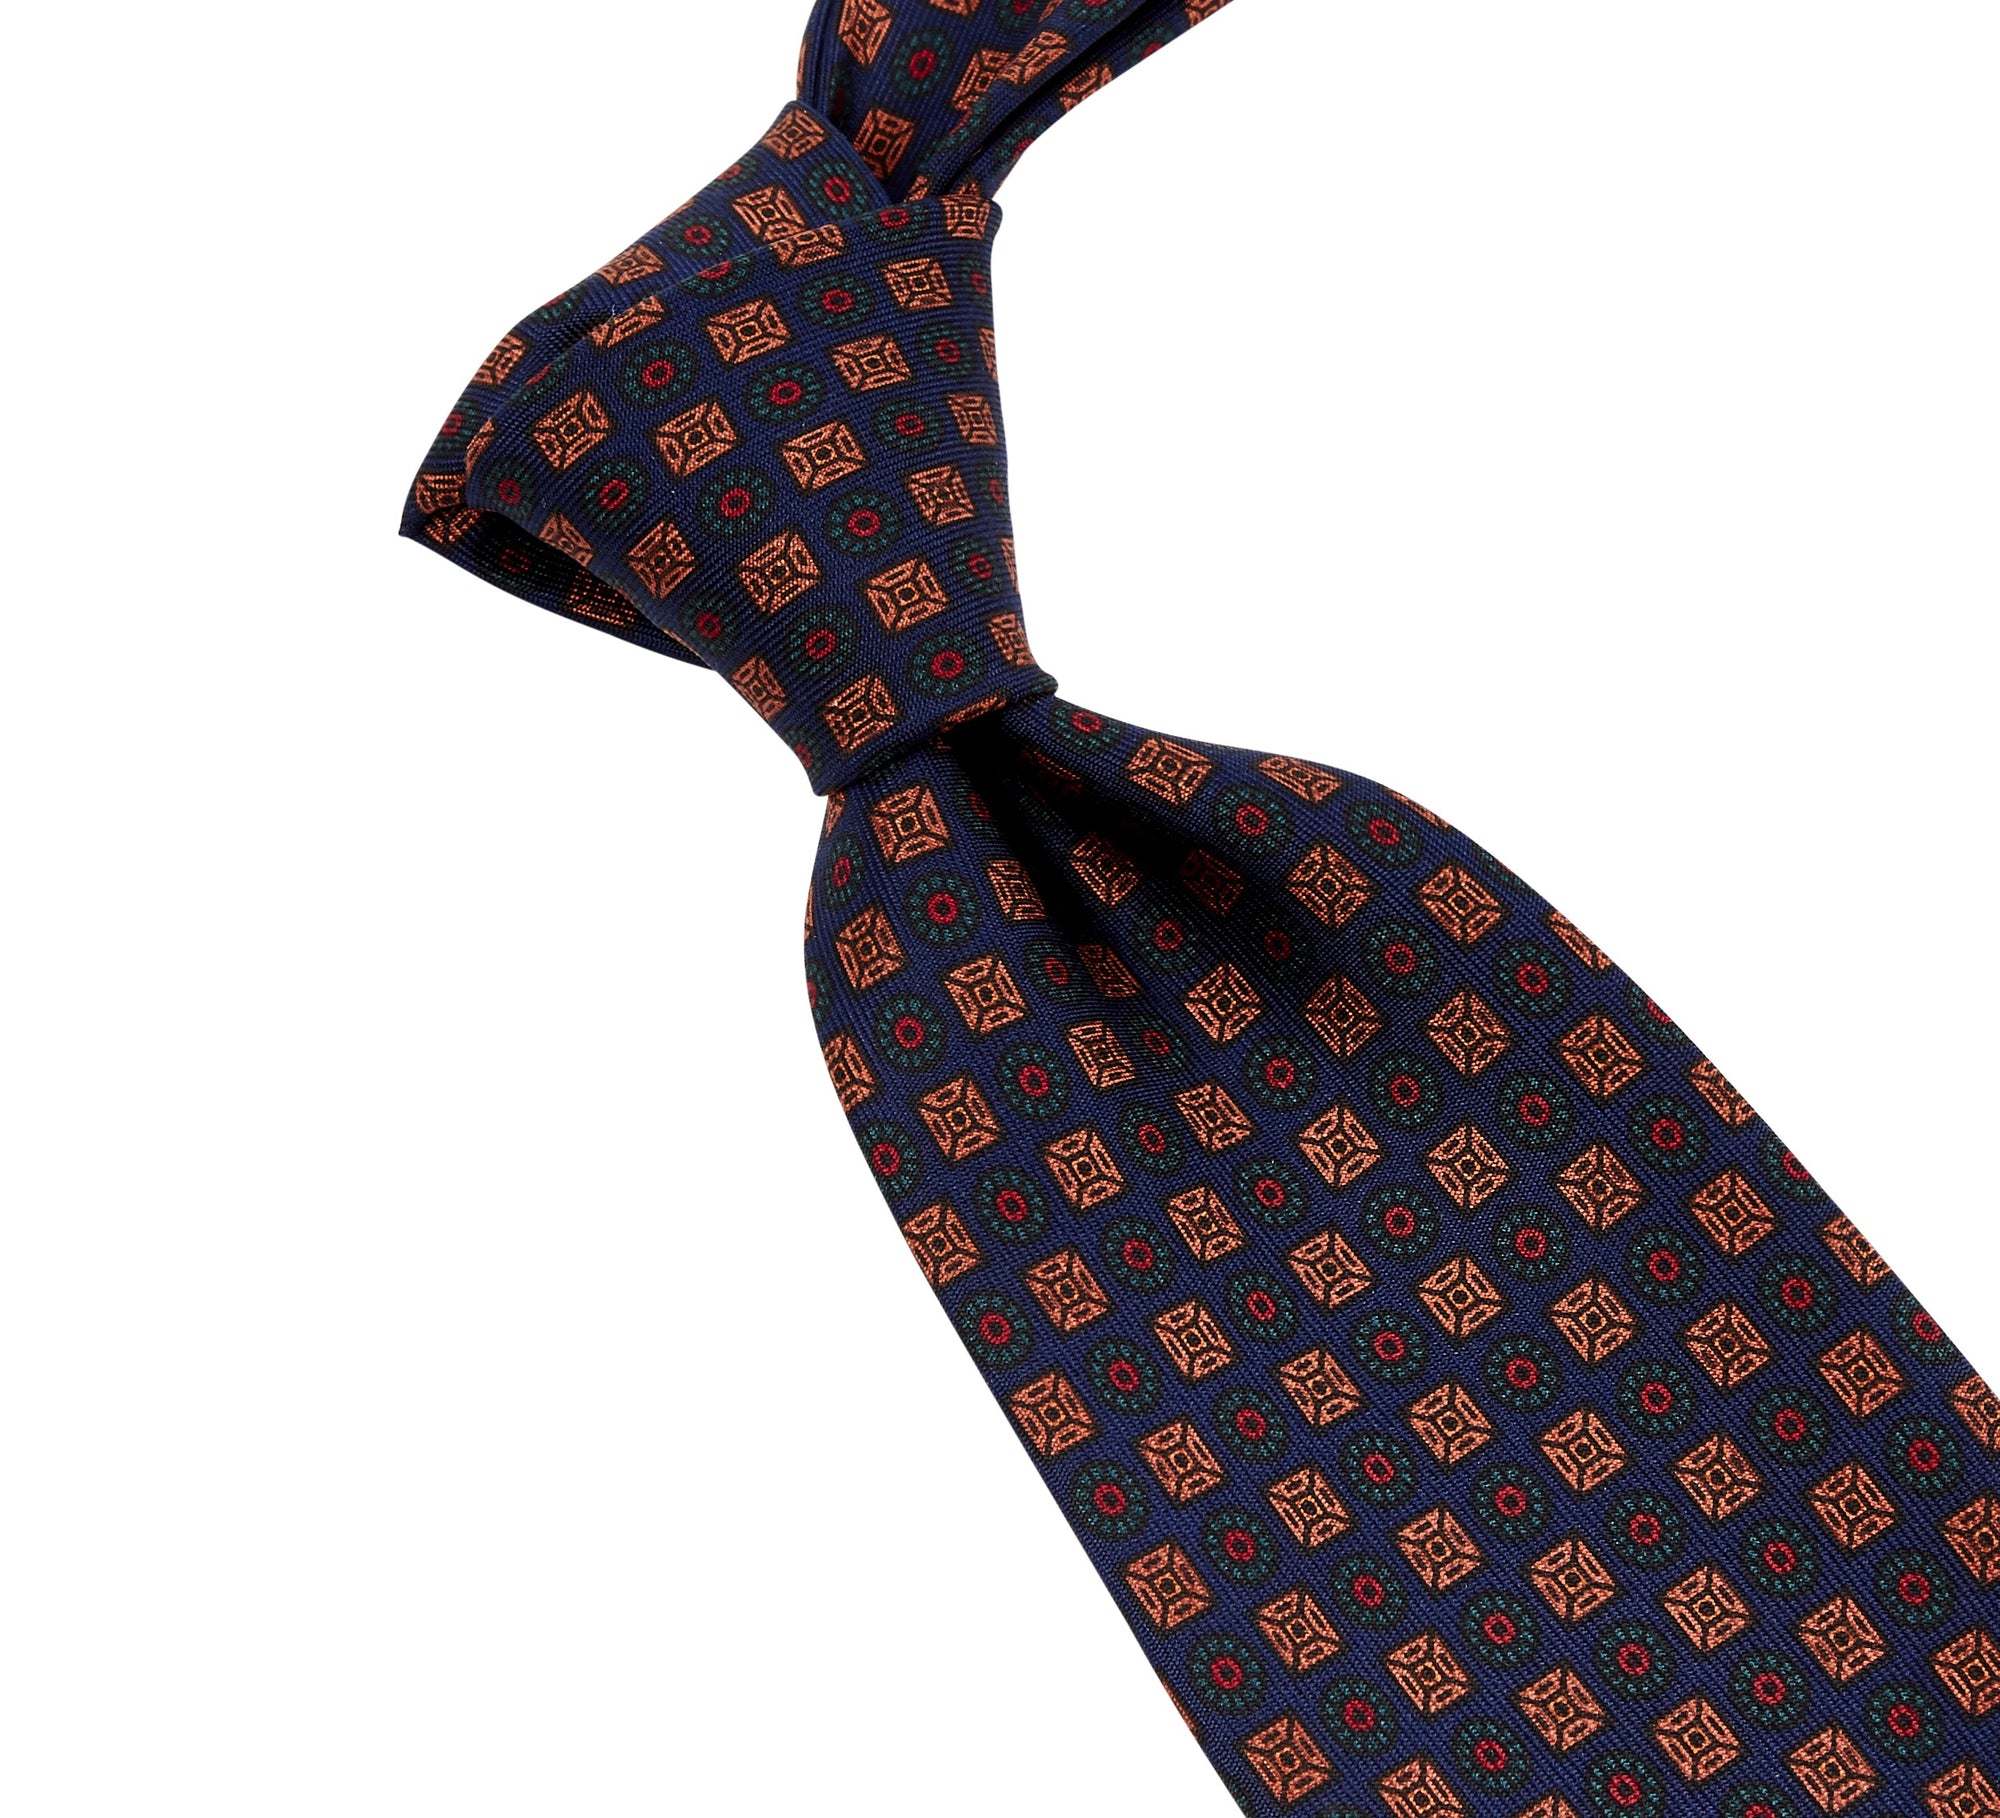 A high-quality, handmade Sovereign Grade Dark Navy Ancient Madder Tie with an orange and blue pattern, made in the United Kingdom by KirbyAllison.com.